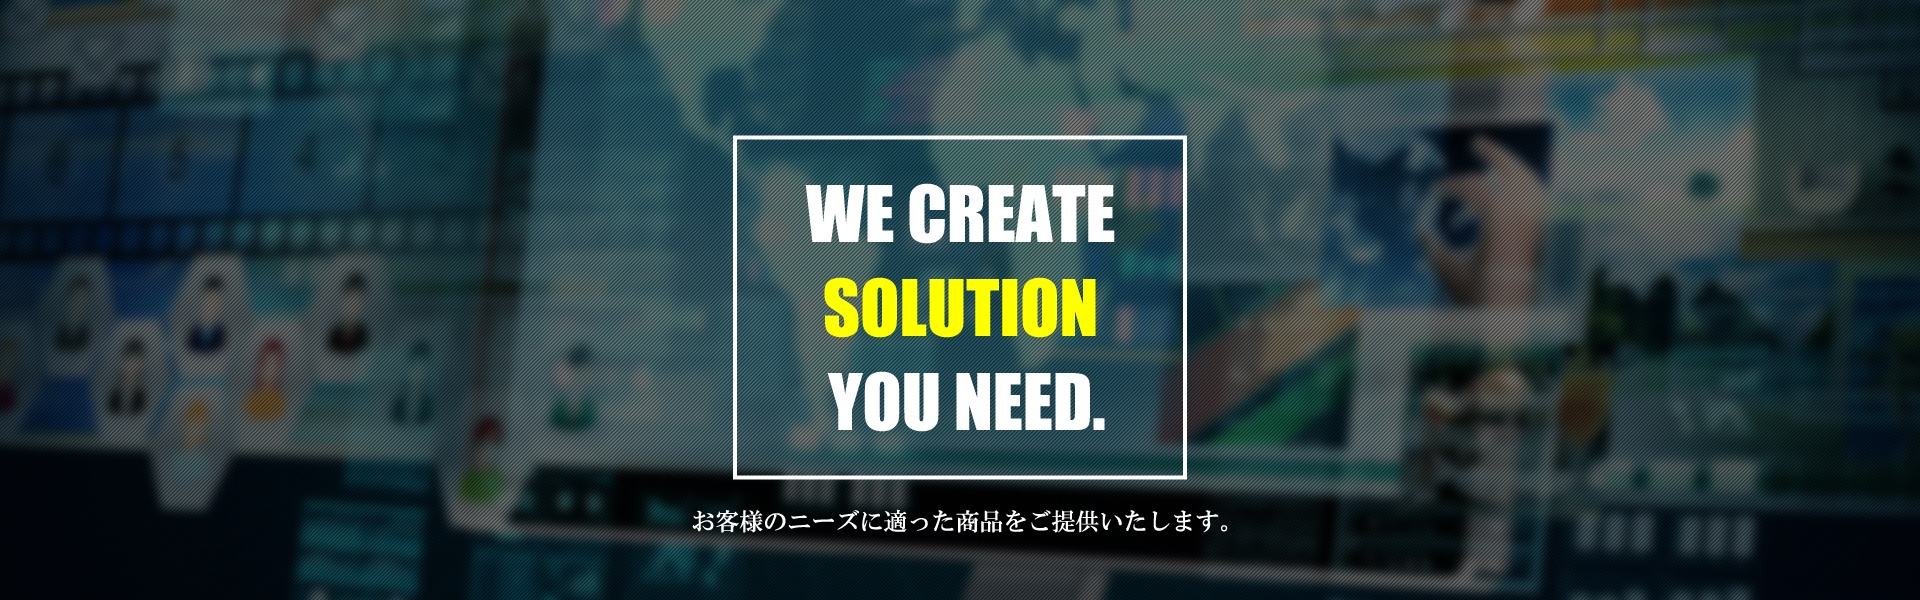 We create solution you need